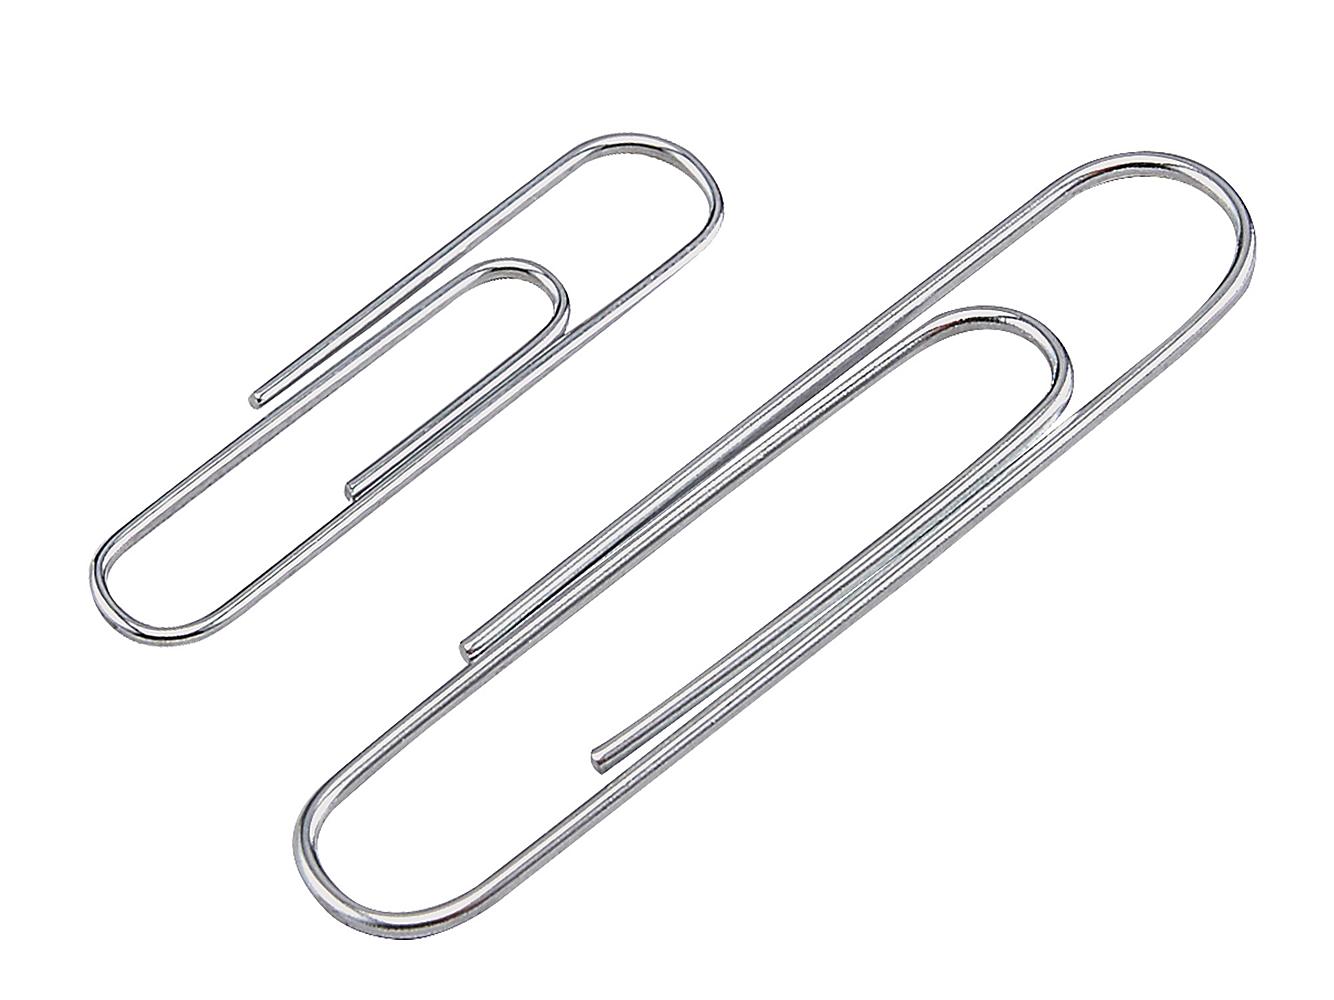 Universal Paper Clips, Standard & Large in Stock - ULINE